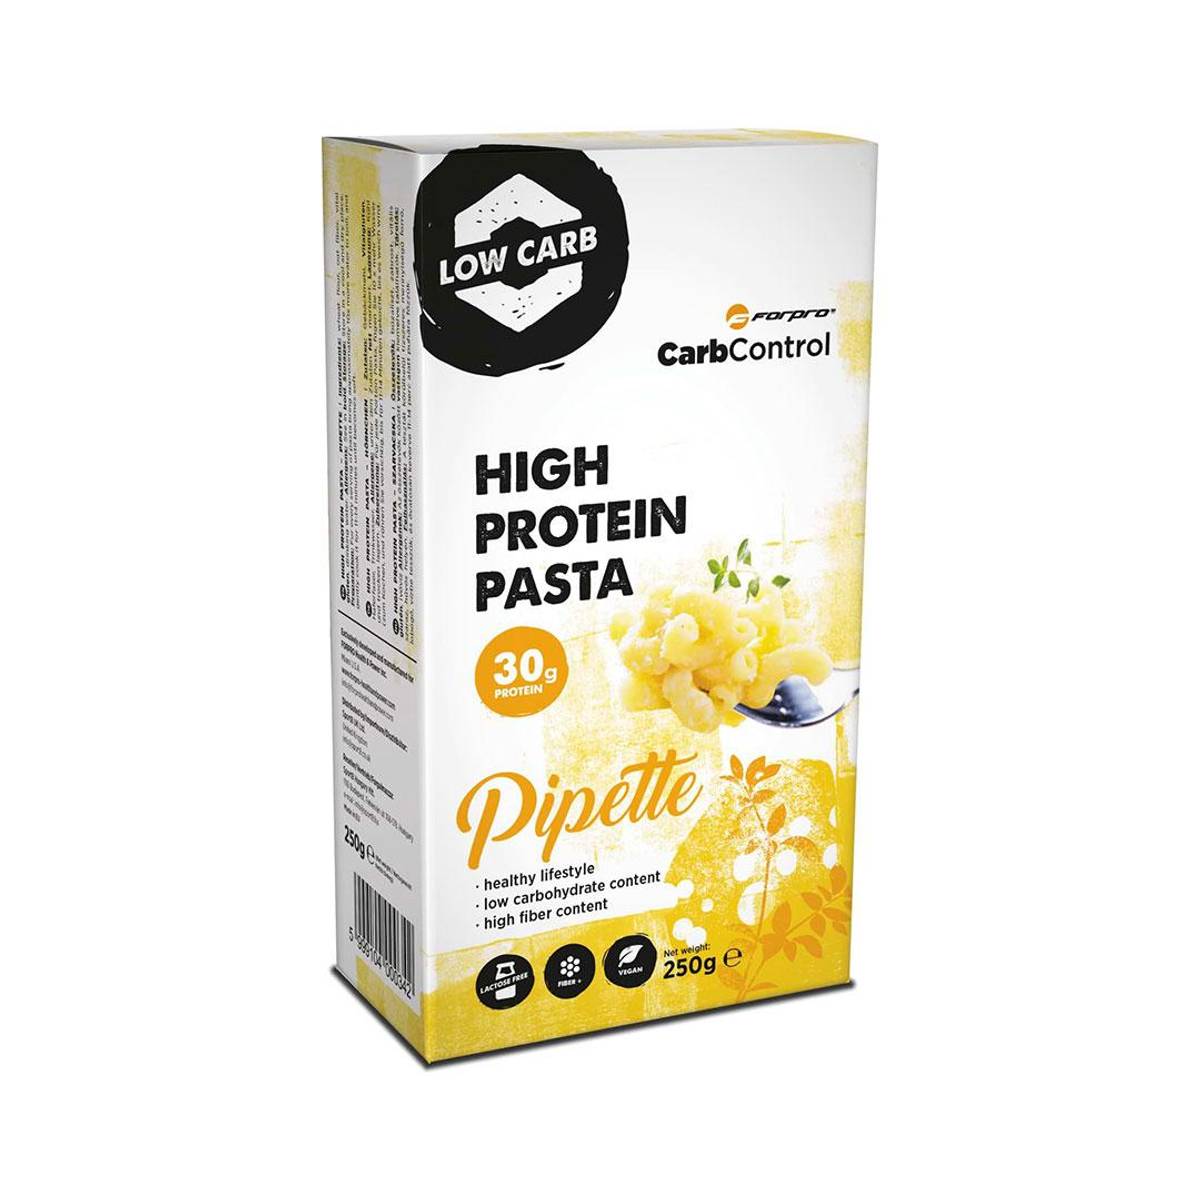 High Protein Pasta, 250g, Pipette